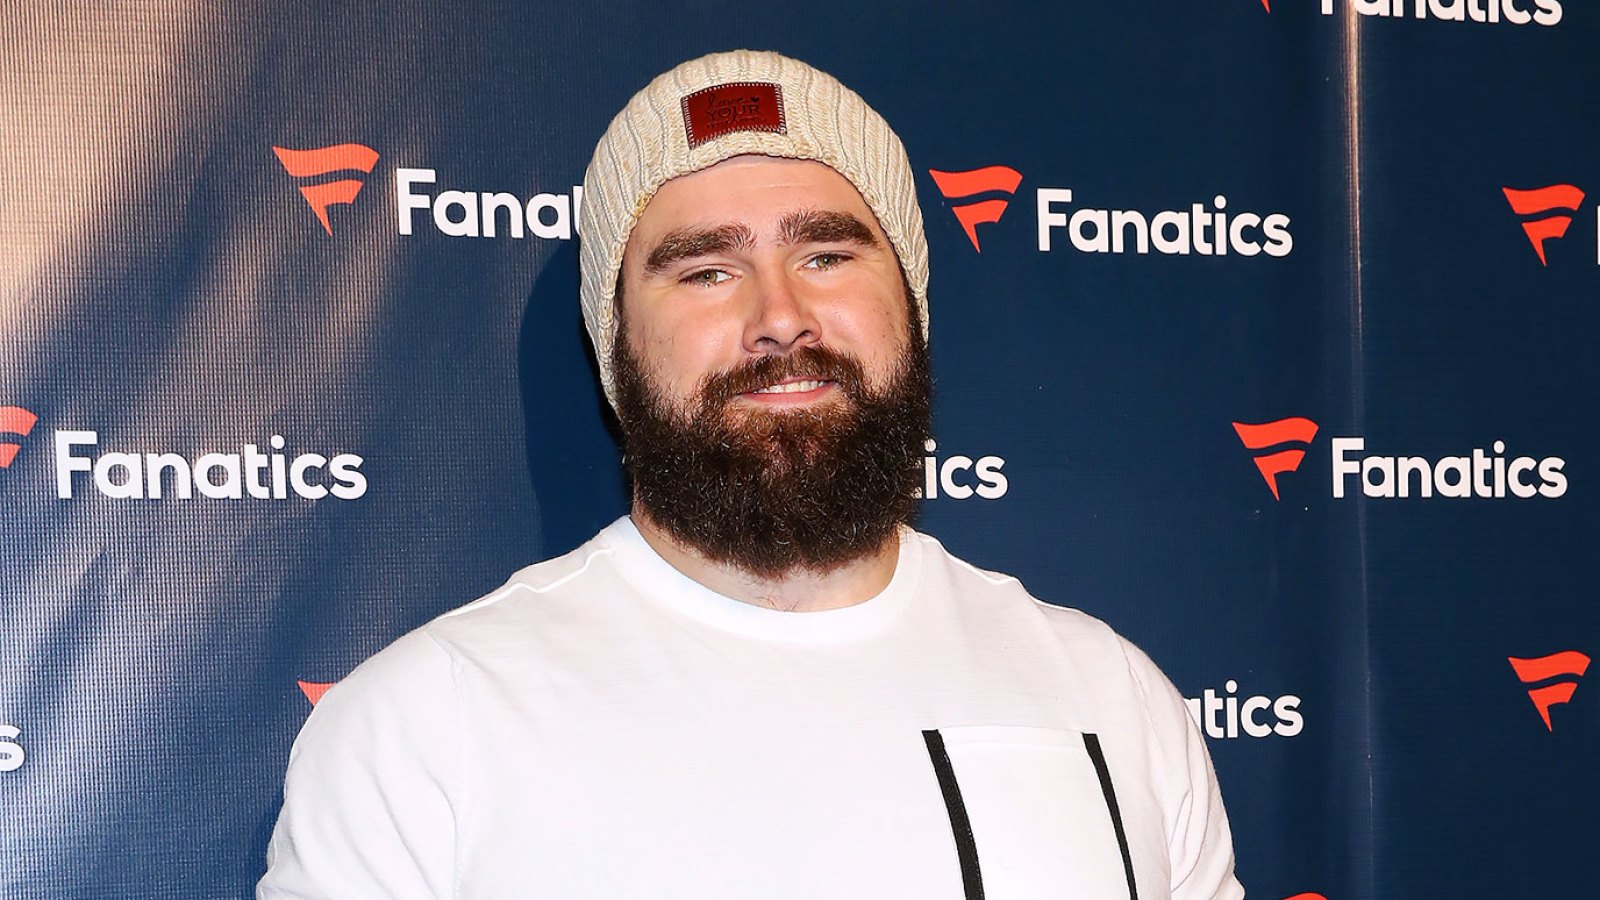 Jason Kelce Fought for a Normal Sized Super Bowl Ring When the Eagles Won in 2018